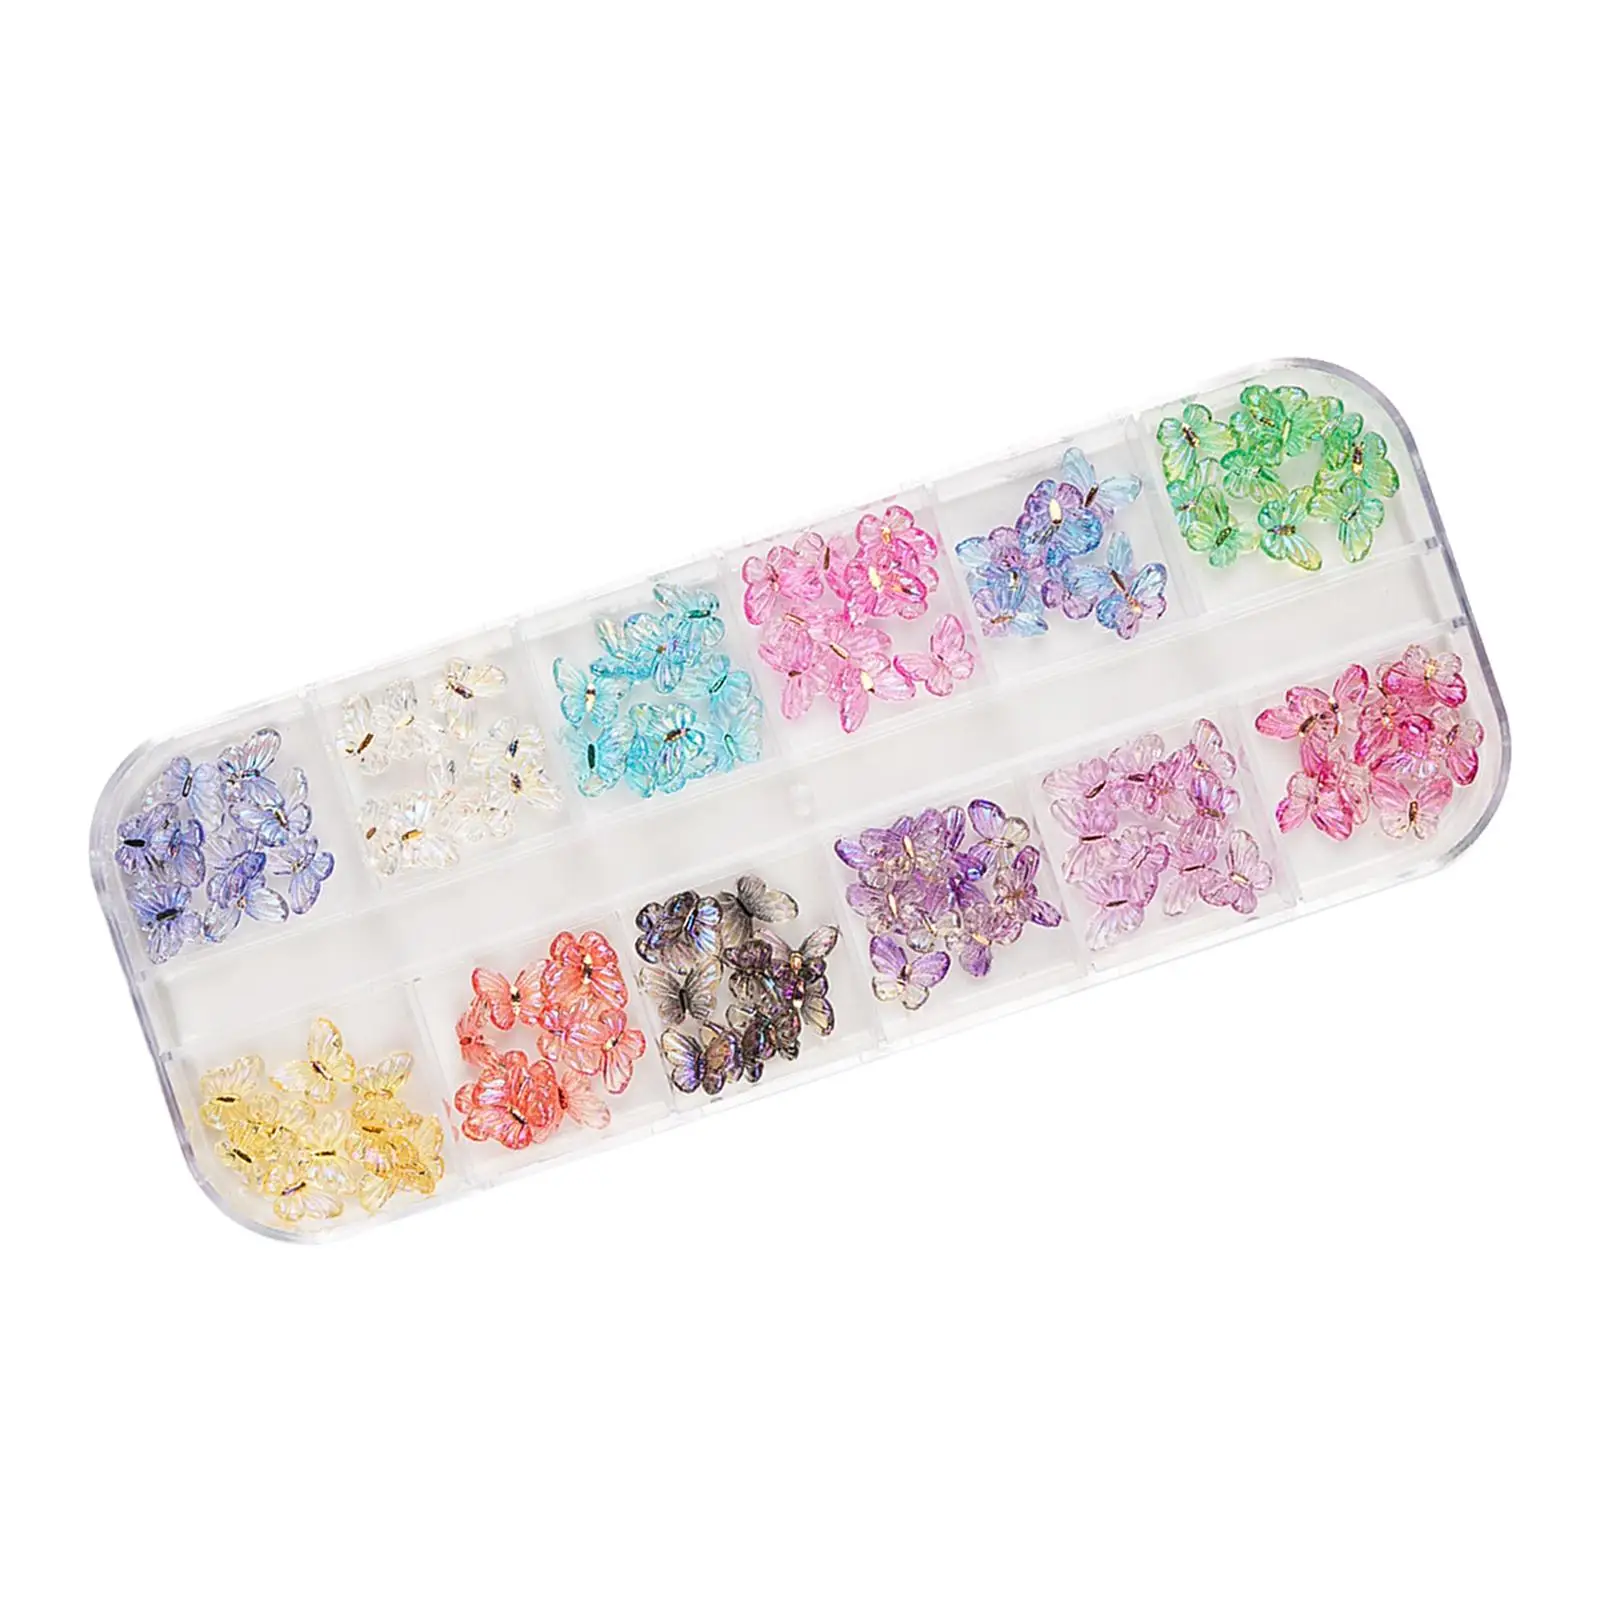 Nail Art Rhinestones Set Supplies Women Girls Spring Summer Cute Butterfly Nail Art Charms Shiny for Professional Use DIY Crafts